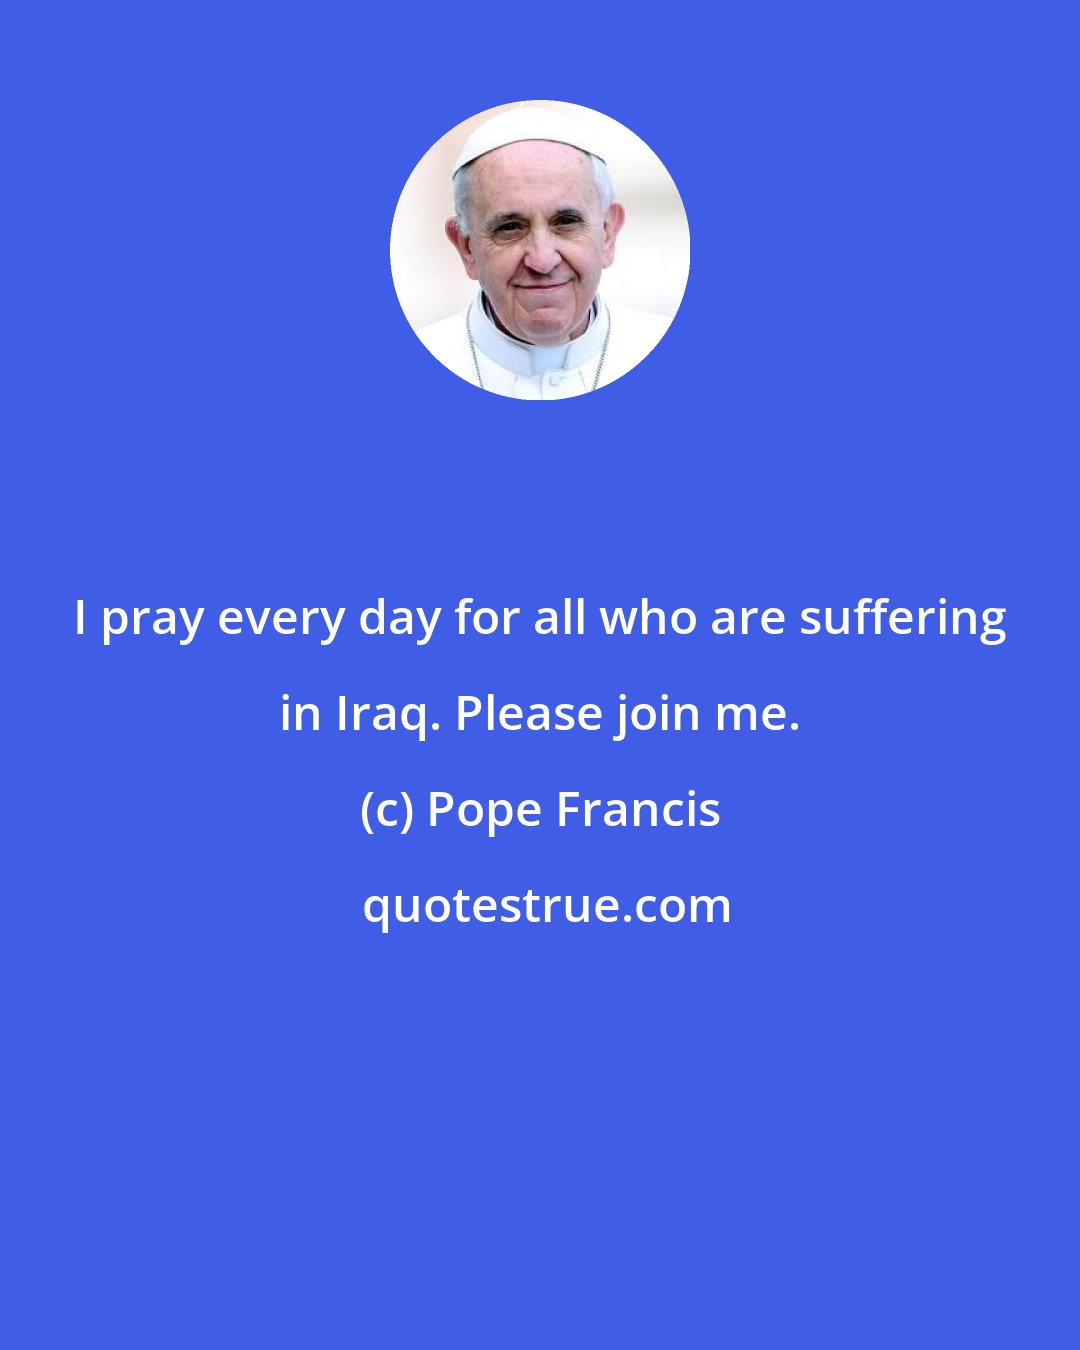 Pope Francis: I pray every day for all who are suffering in Iraq. Please join me.